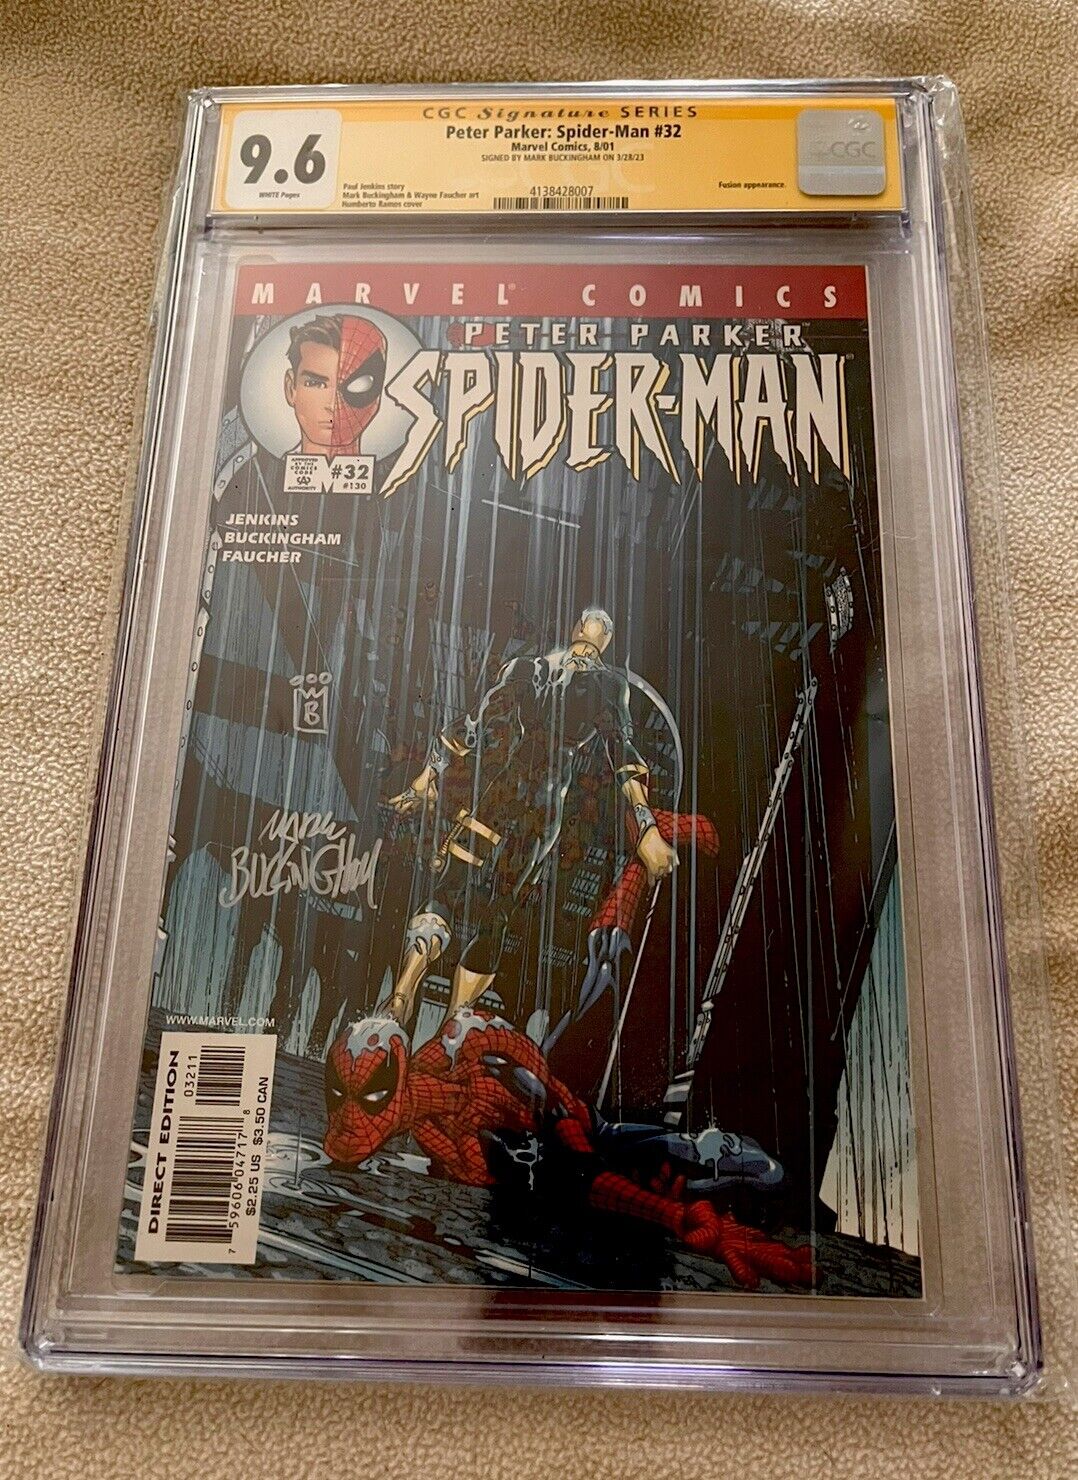 PETER PARKER: SPIDER-MAN #32 CGC 9.6 SIGNED BY MARK BUCKINGHAM FUSION APPEARANCE